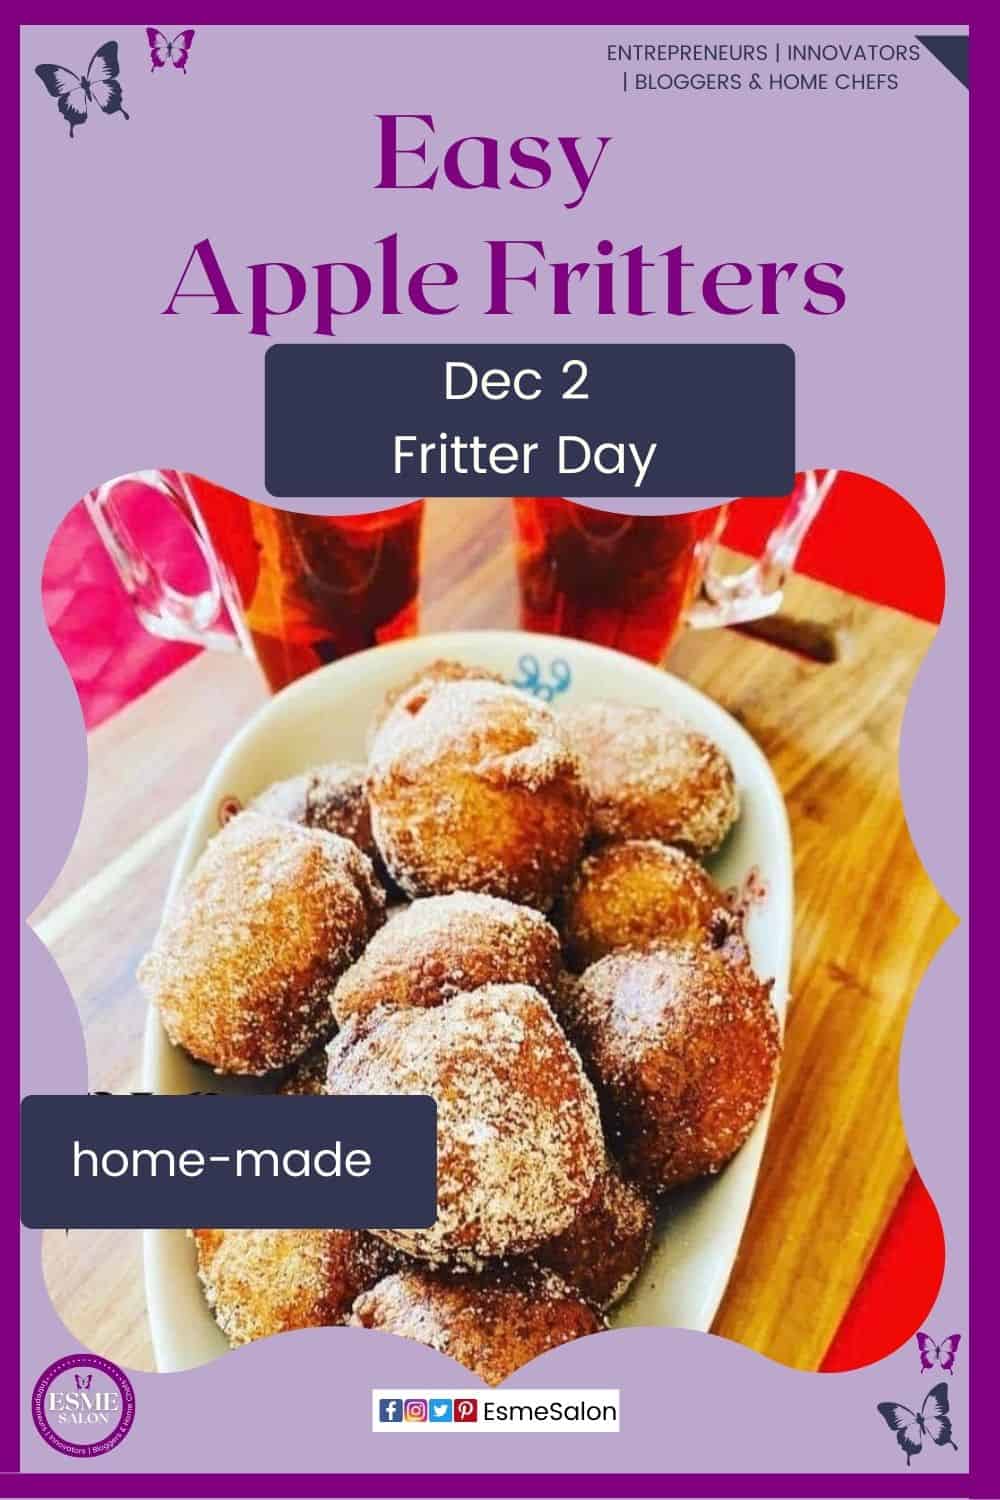 an image of a bowl filled with Cinnamon covered Apple Fritters